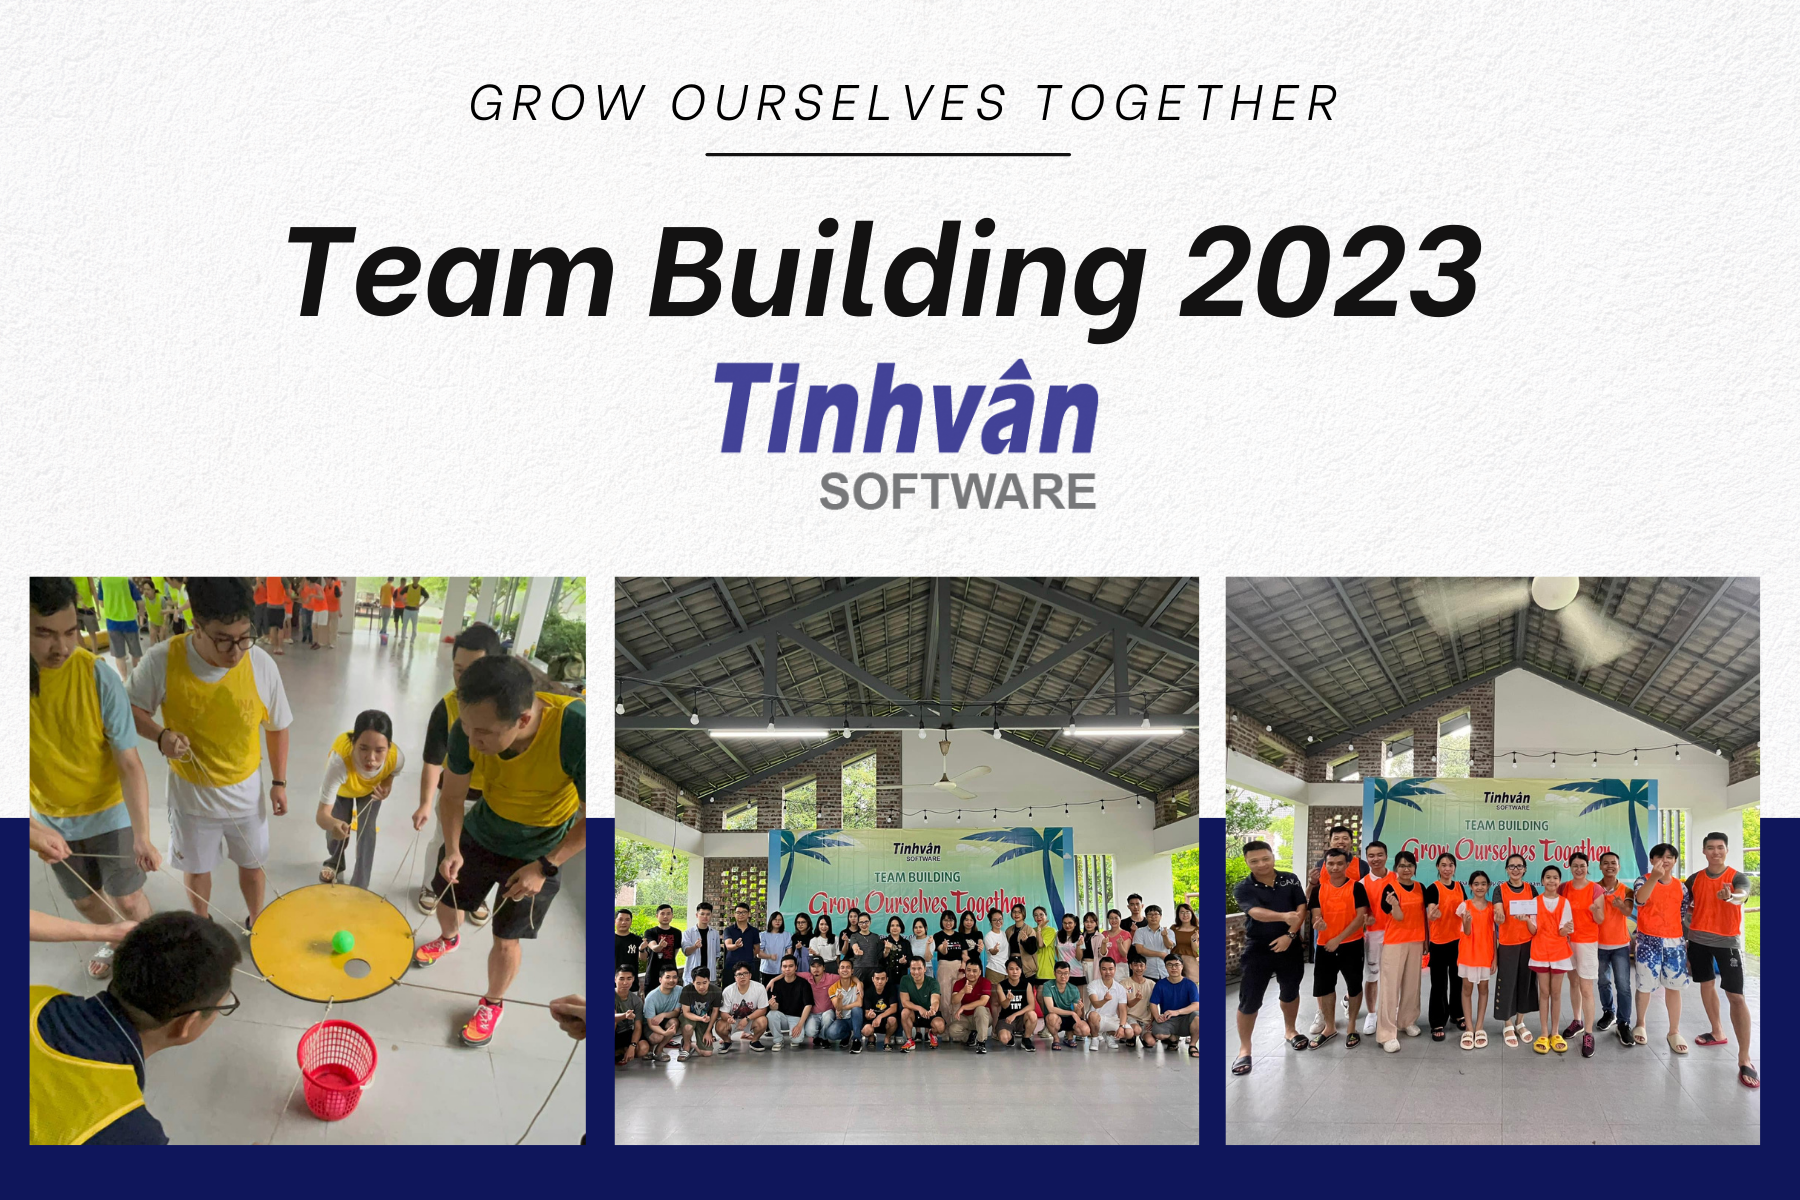 Team Building 2023 with TSOers: Grow Ourselve Together!